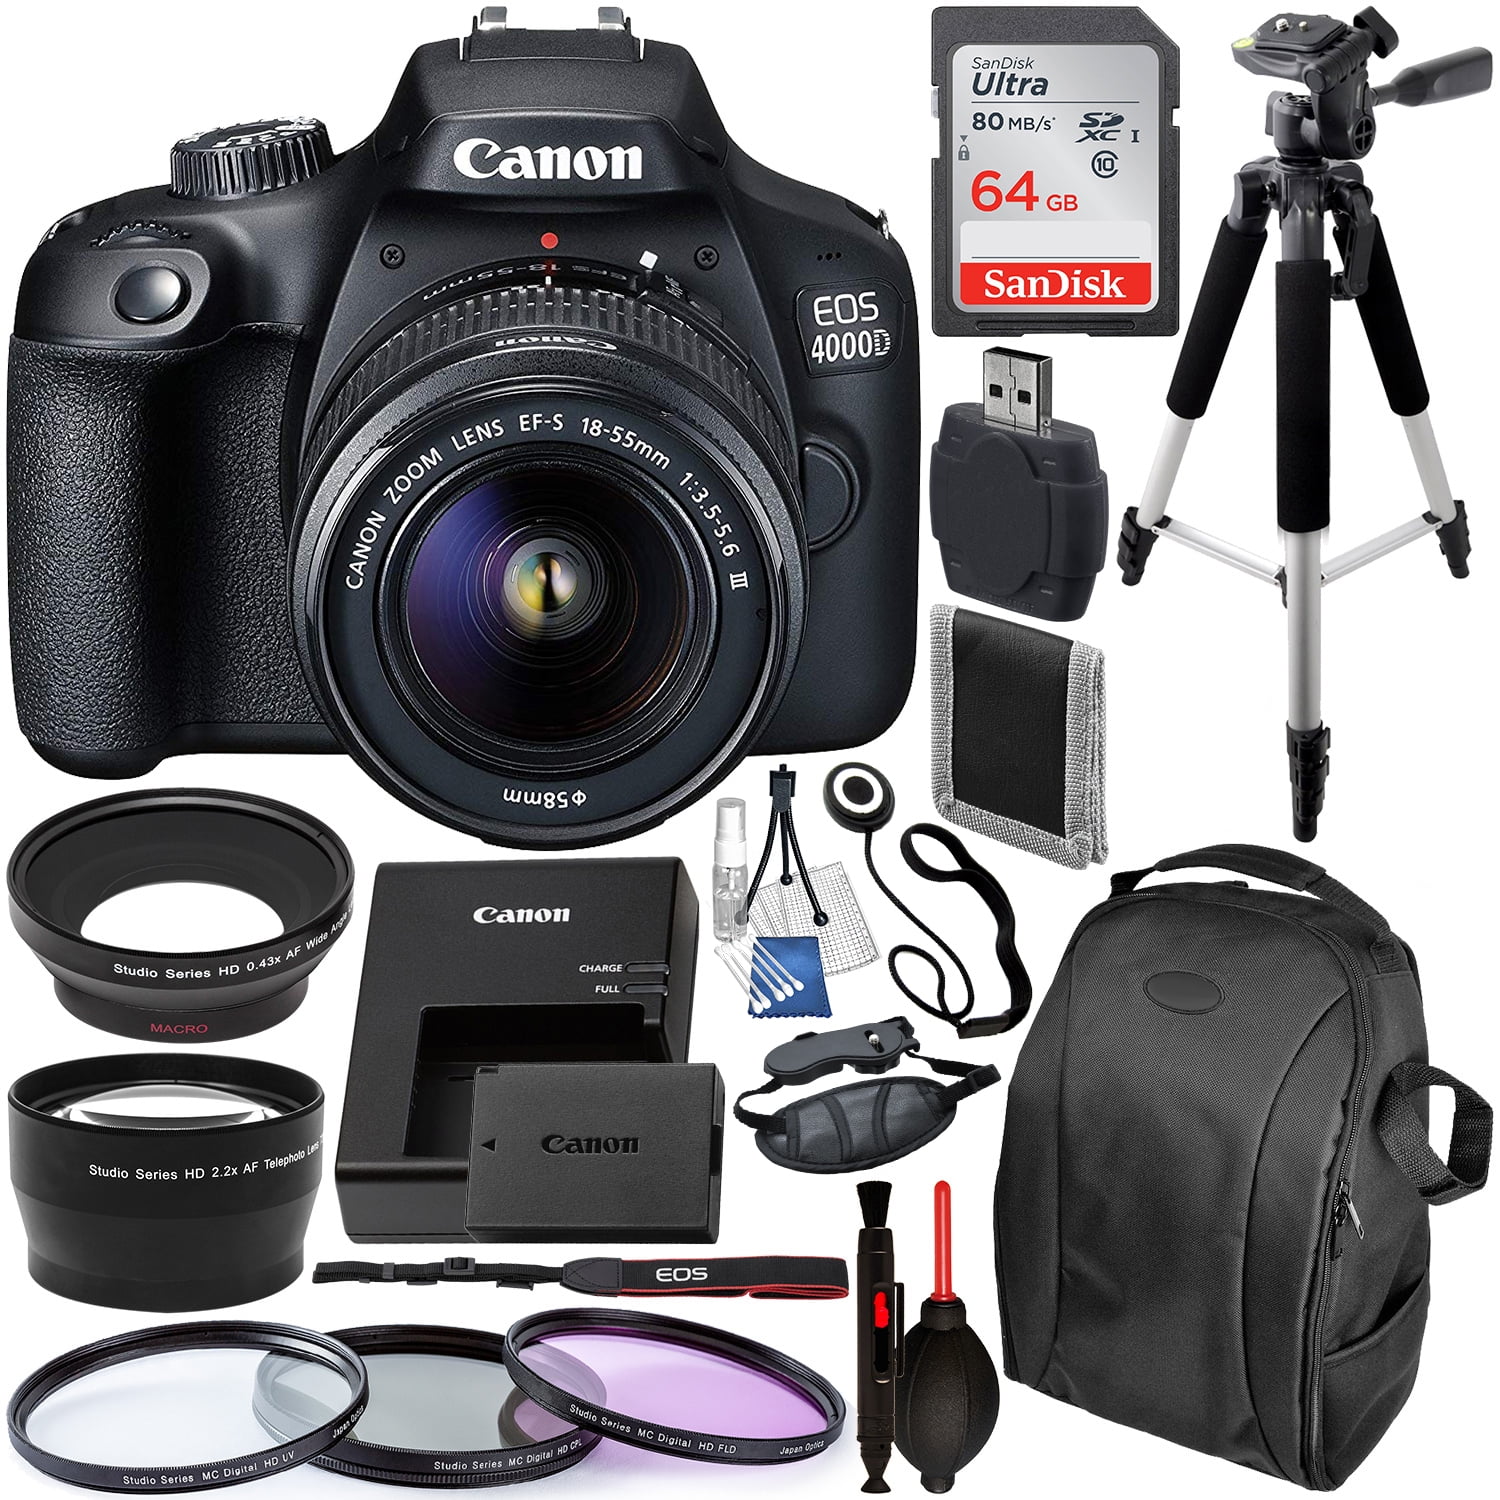 Tripod and A-Cell Accessory Bundle Case 2 Pack SanDisk 32GB Memory Card Canon EOS 4000D / Rebel T100 DSLR Camera with EF-S 18-55mm Lens 